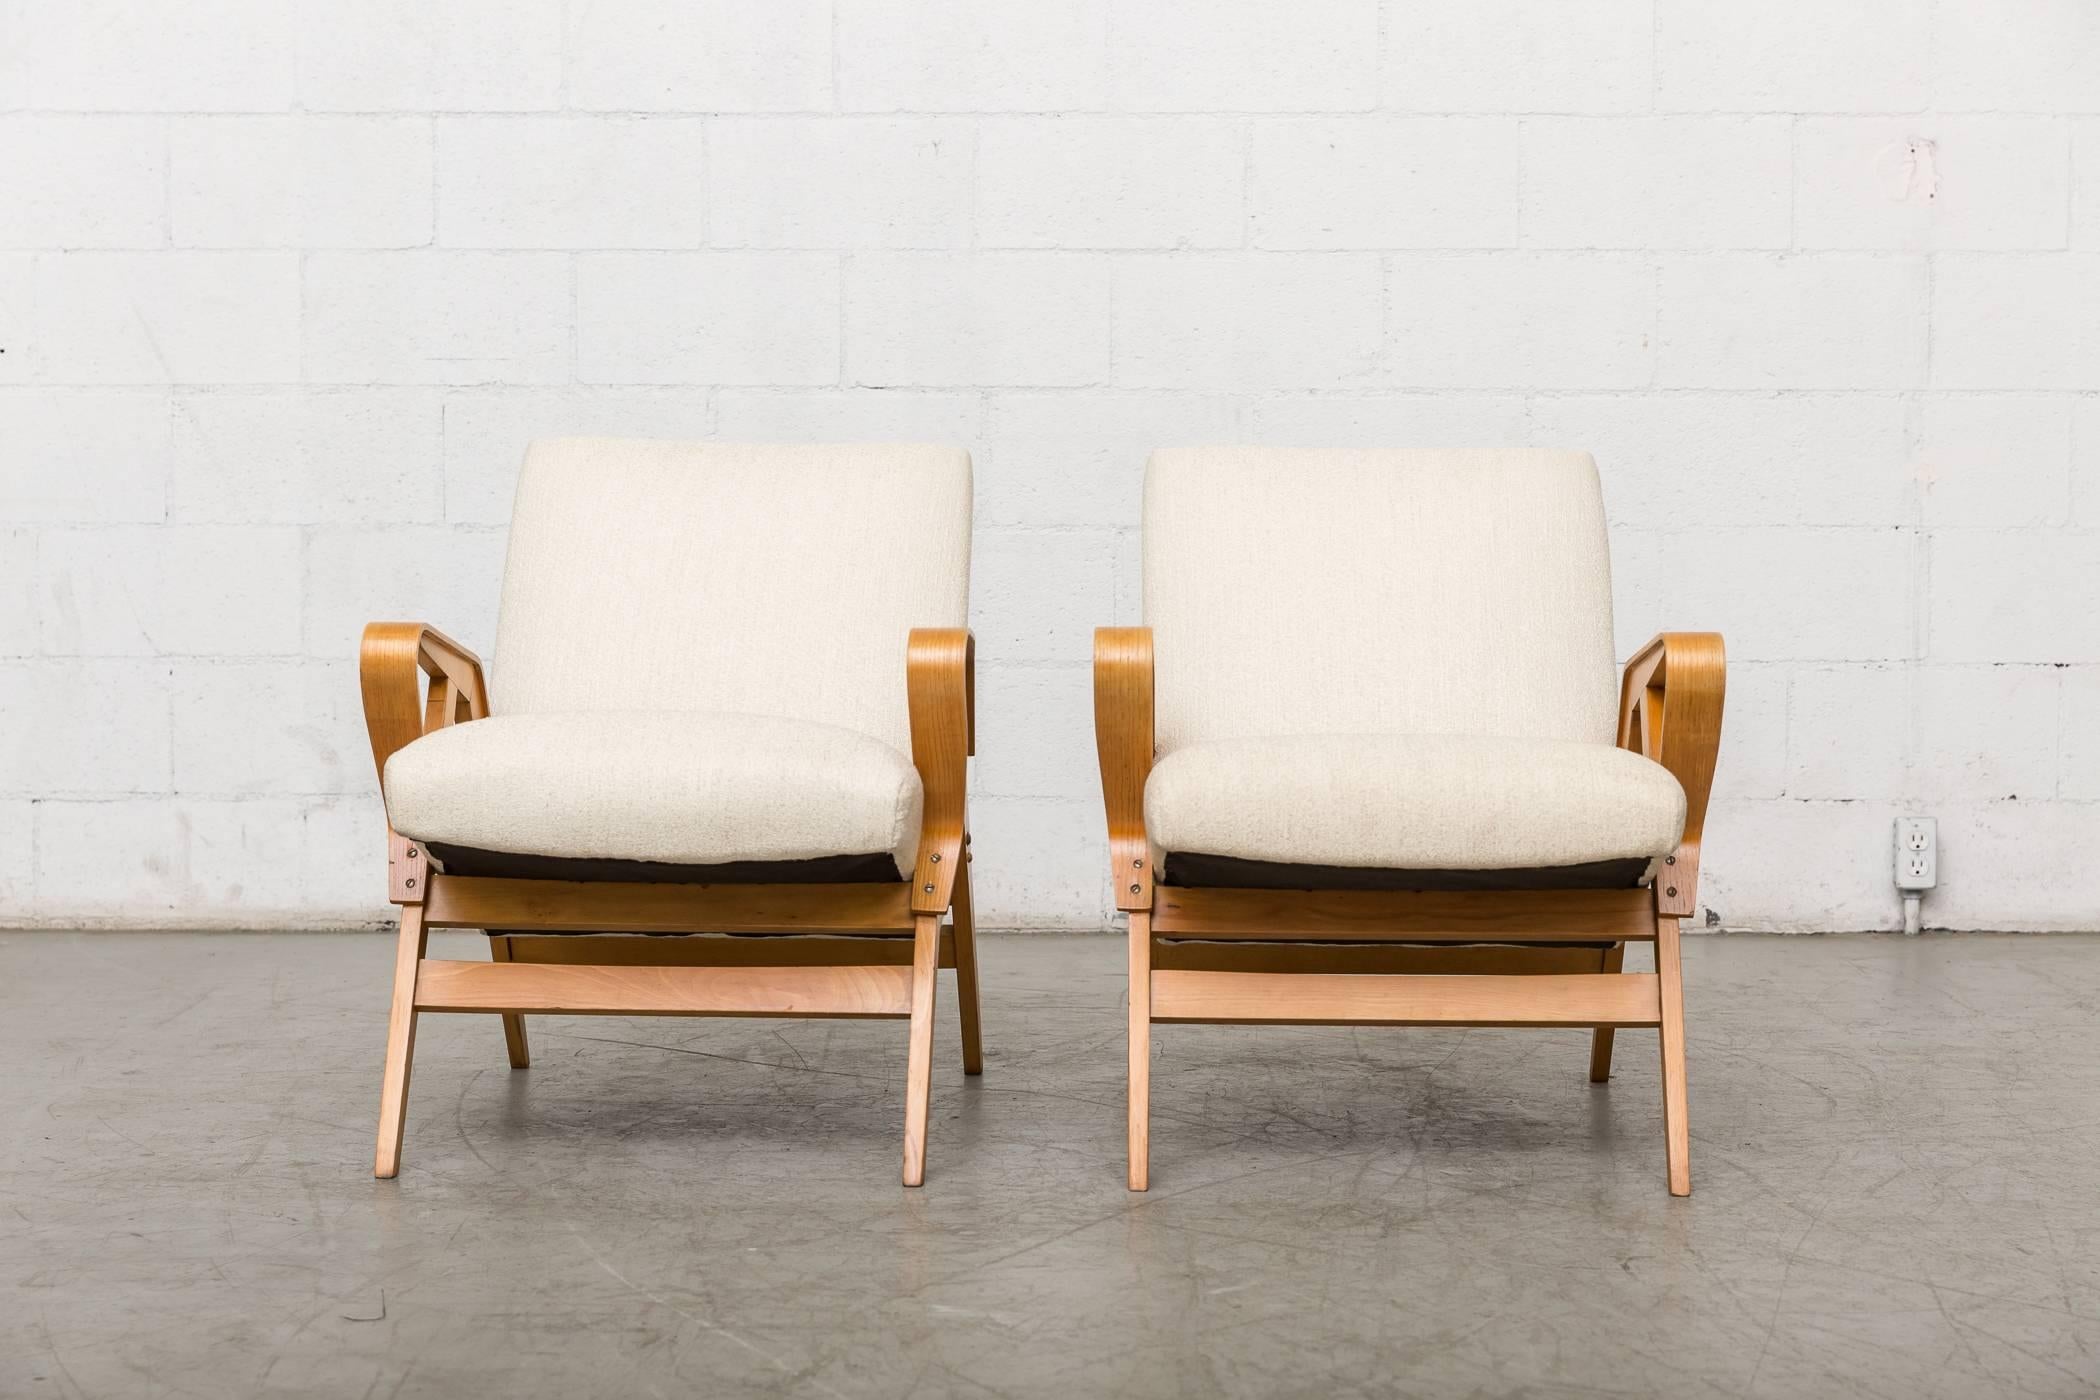 Upholstery Pair of Czech Tatra Bent Plywood Lounge Chairs